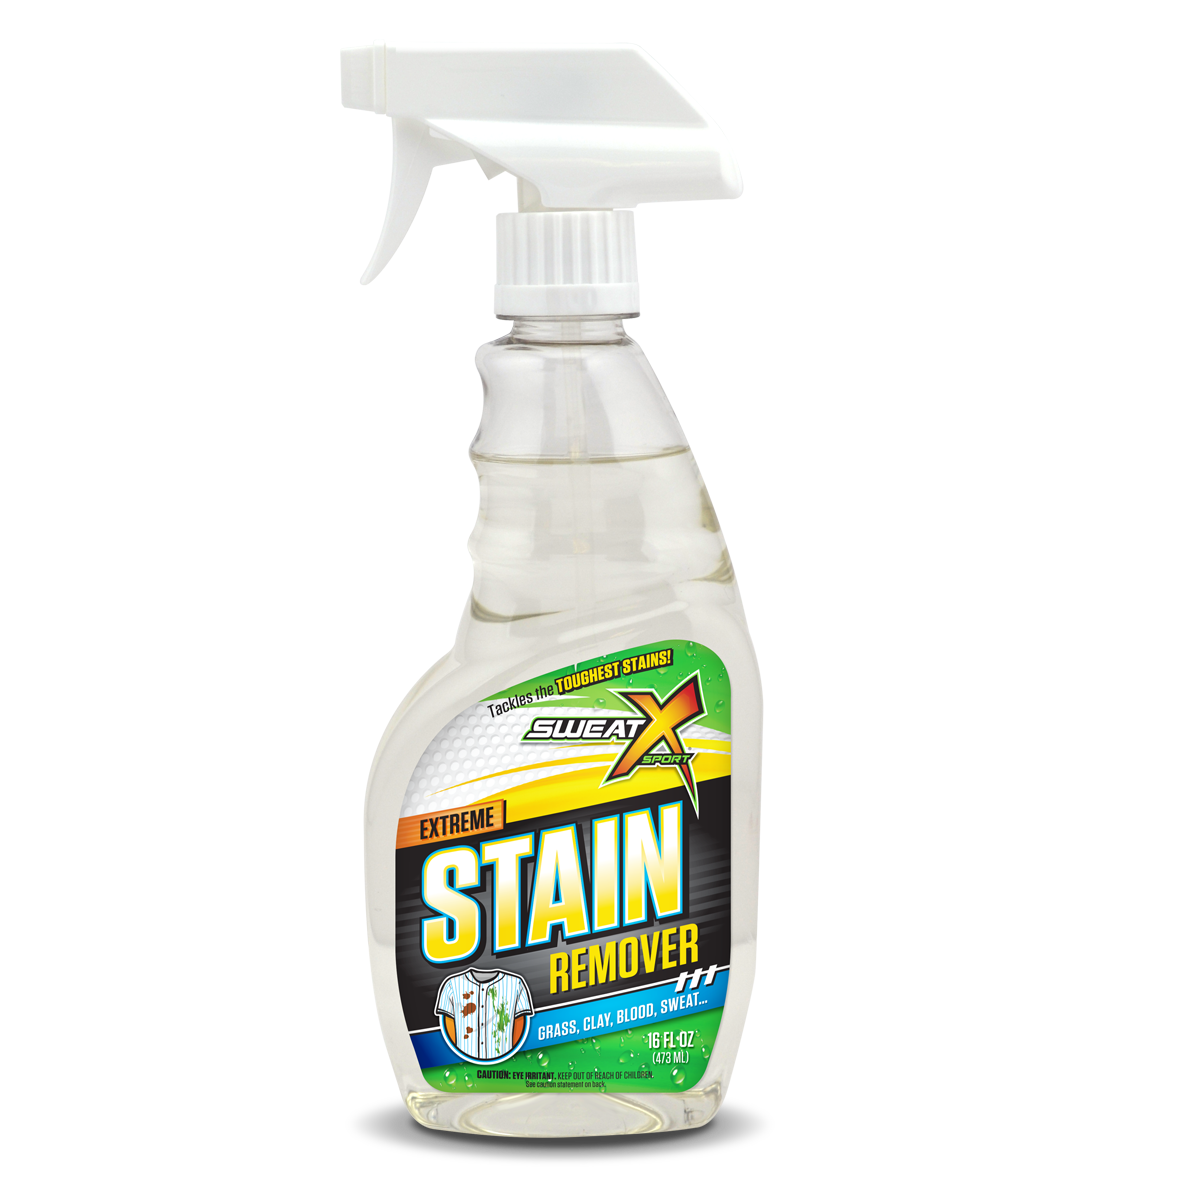 Tackle The Toughest Stains | Sweat X Extreme Stain Remover Spray 16 oz